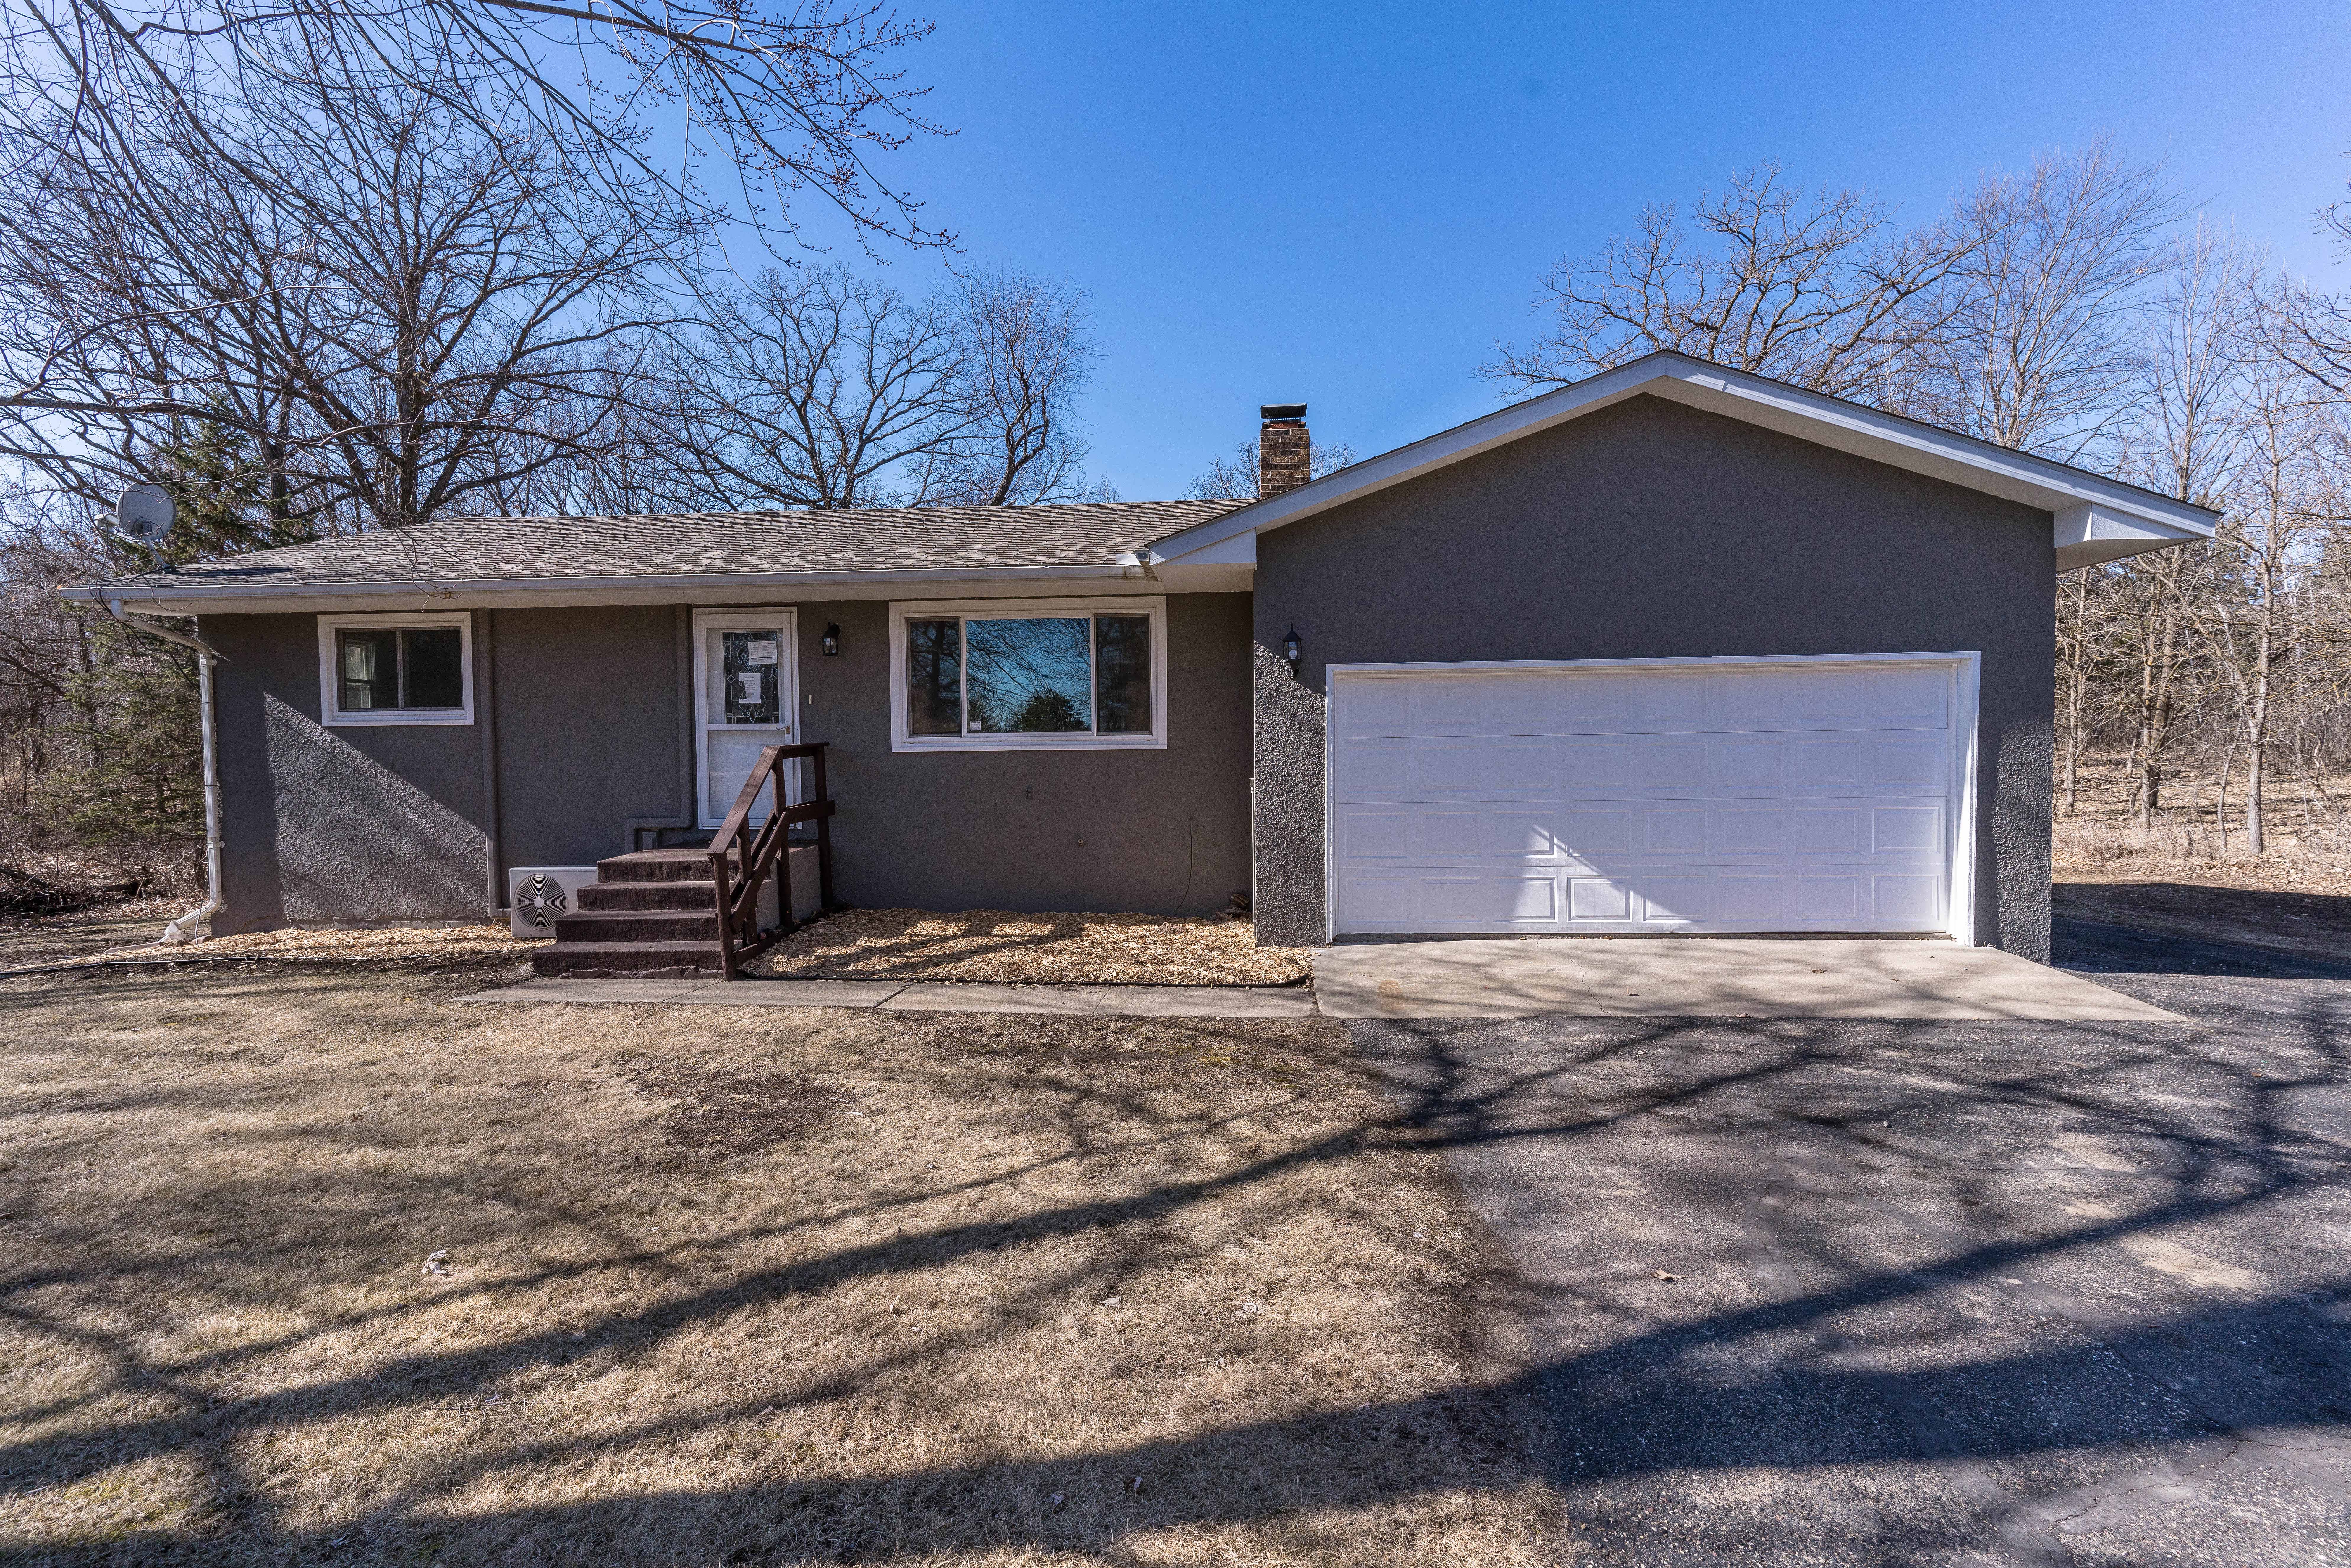 Paradise Dr, Browerville, MN 56438